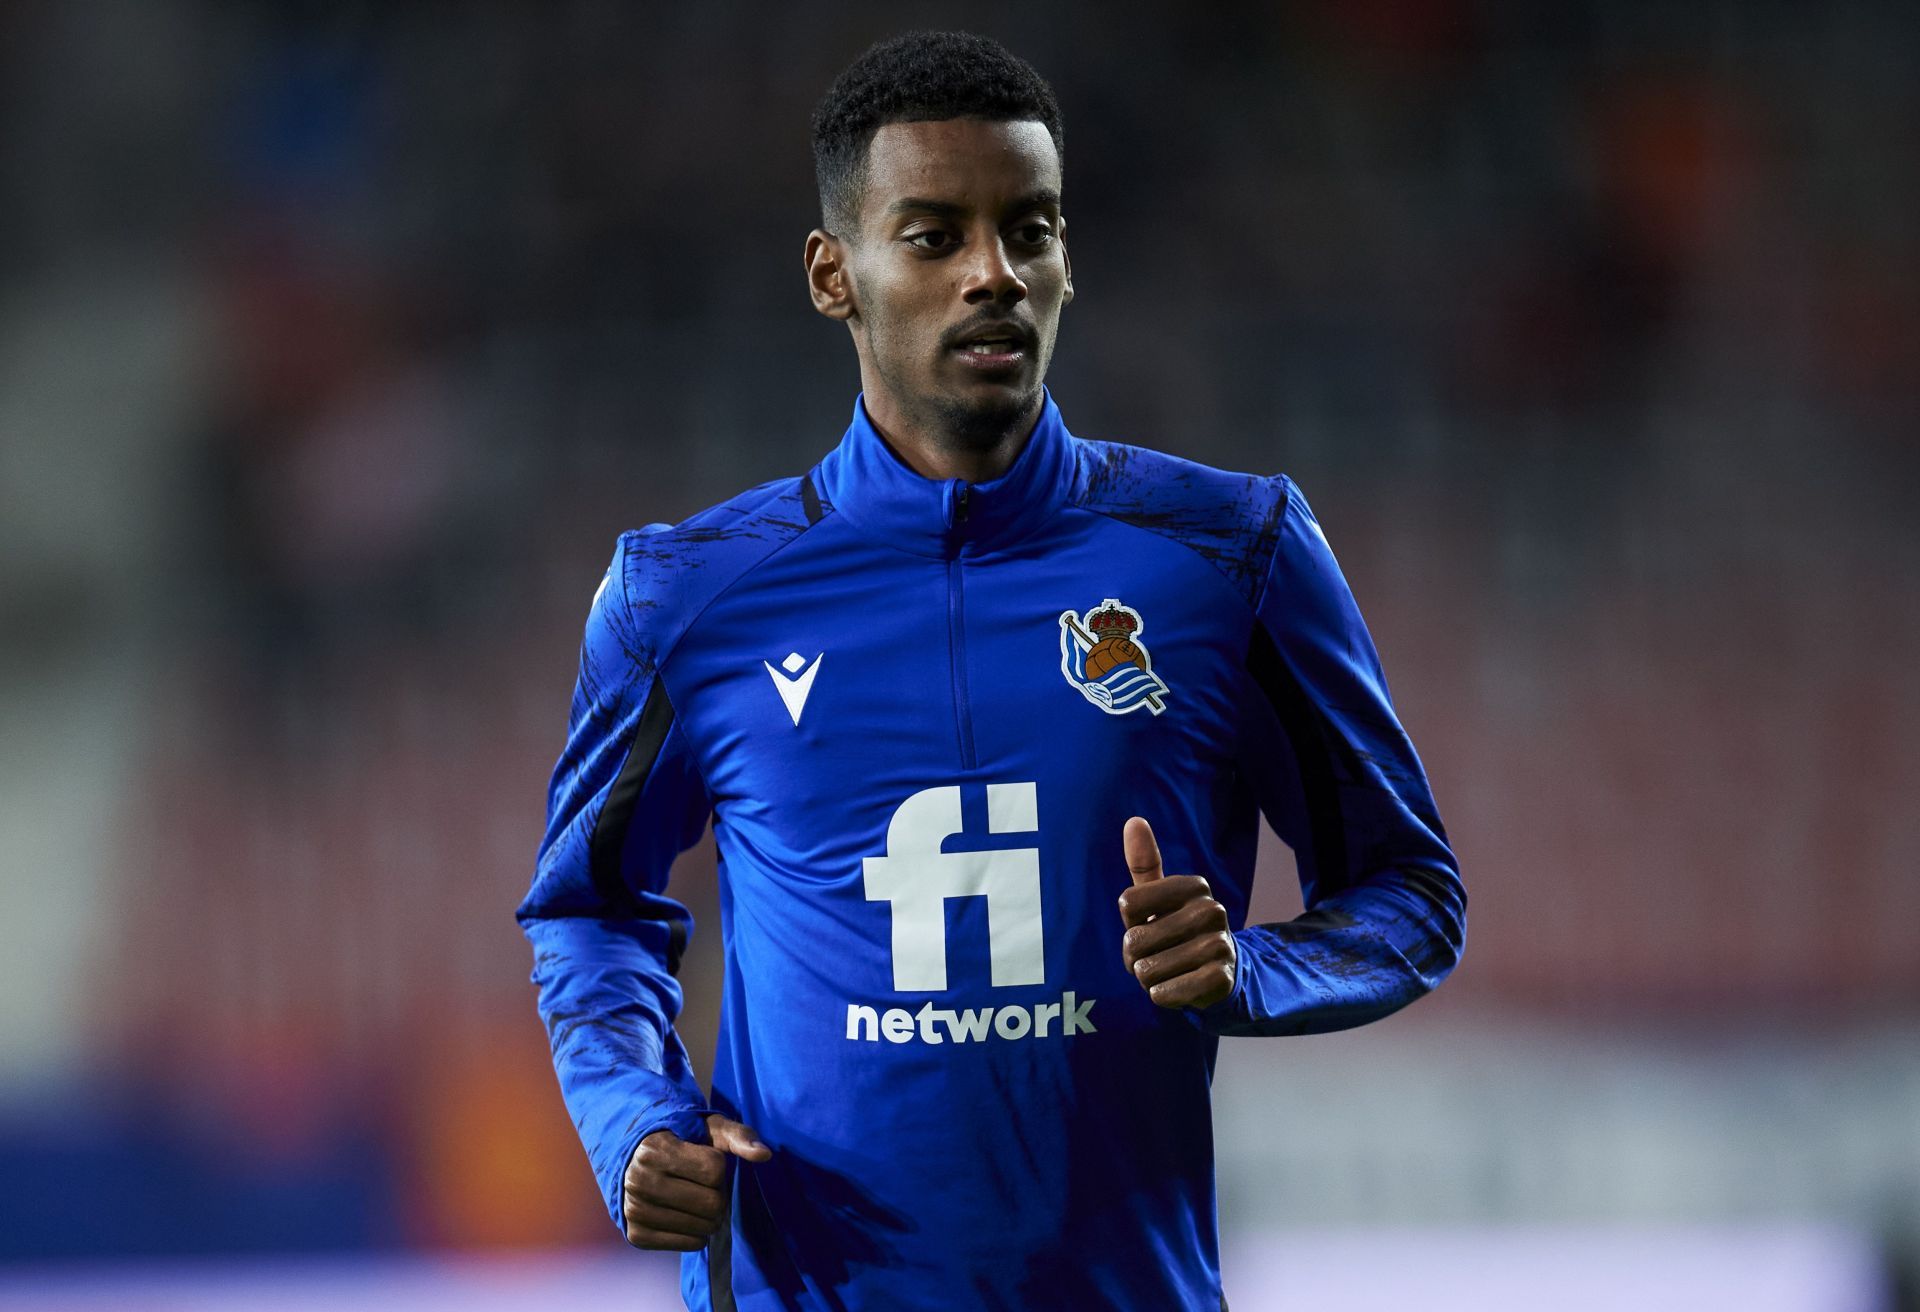 Arsenal did not submit a bid for Alexander Isak in January.